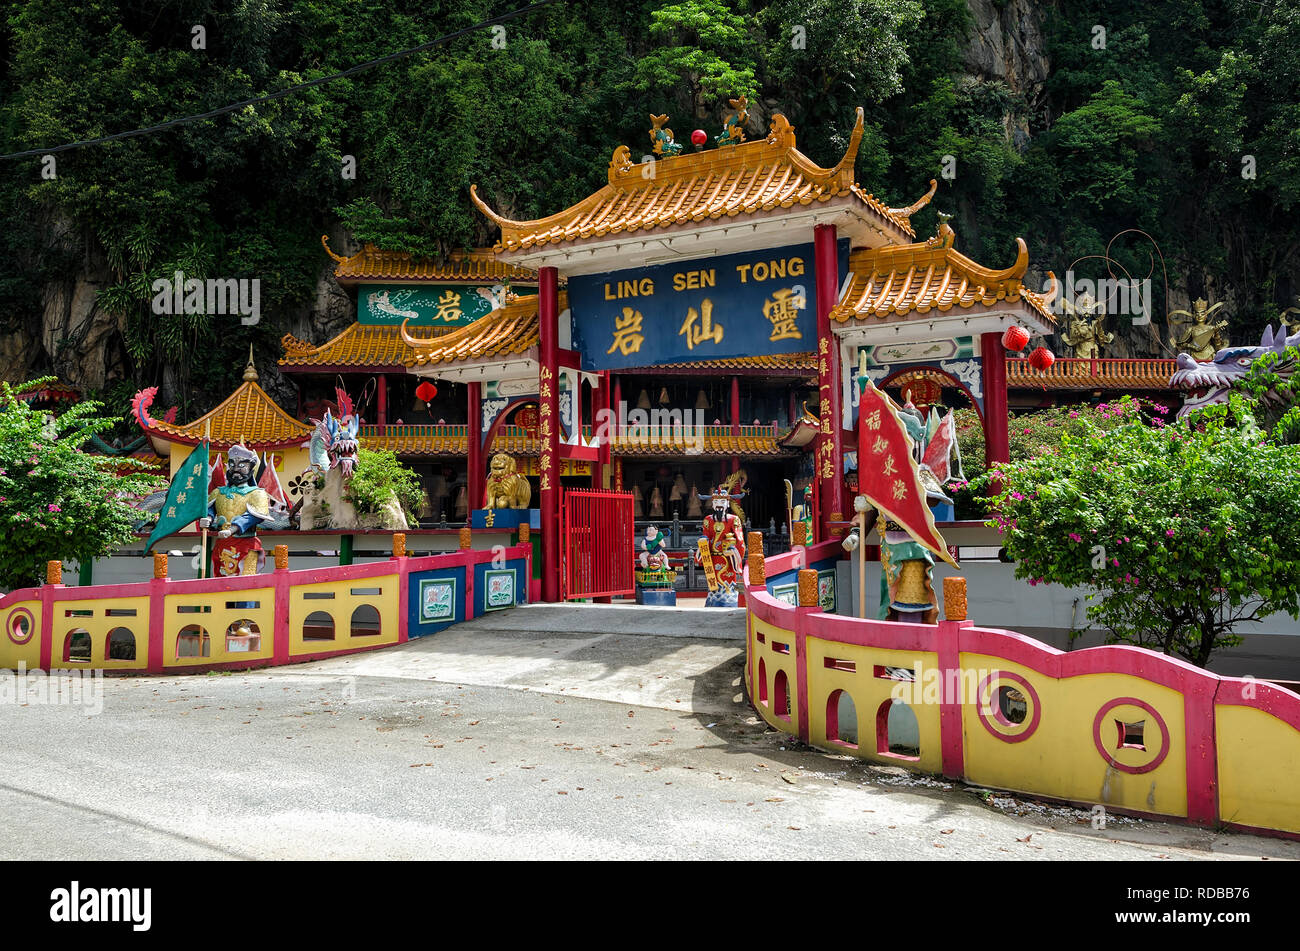 Ipoh, Malaysia - Apr 15, 2018: Ling Sen Tong, Temple cave, Ipoh, Malaysia - Ling Sen Tong is a beautiful Taoist cave temple located at the foot of a l Stock Photo